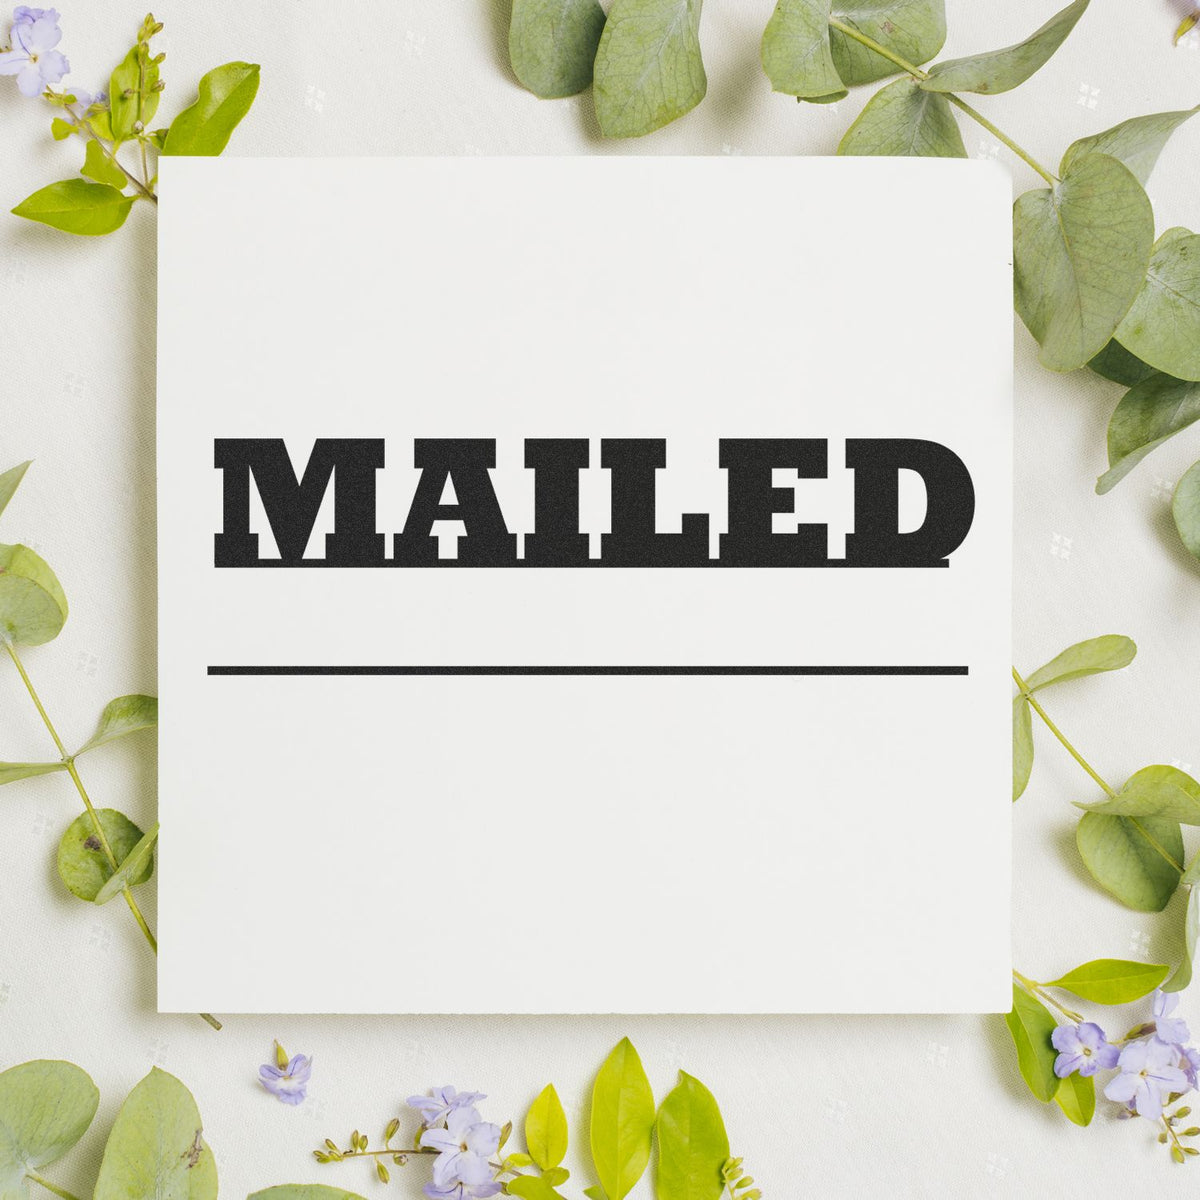 Mailed with Date Line Rubber Stamp Lifestyle Photo